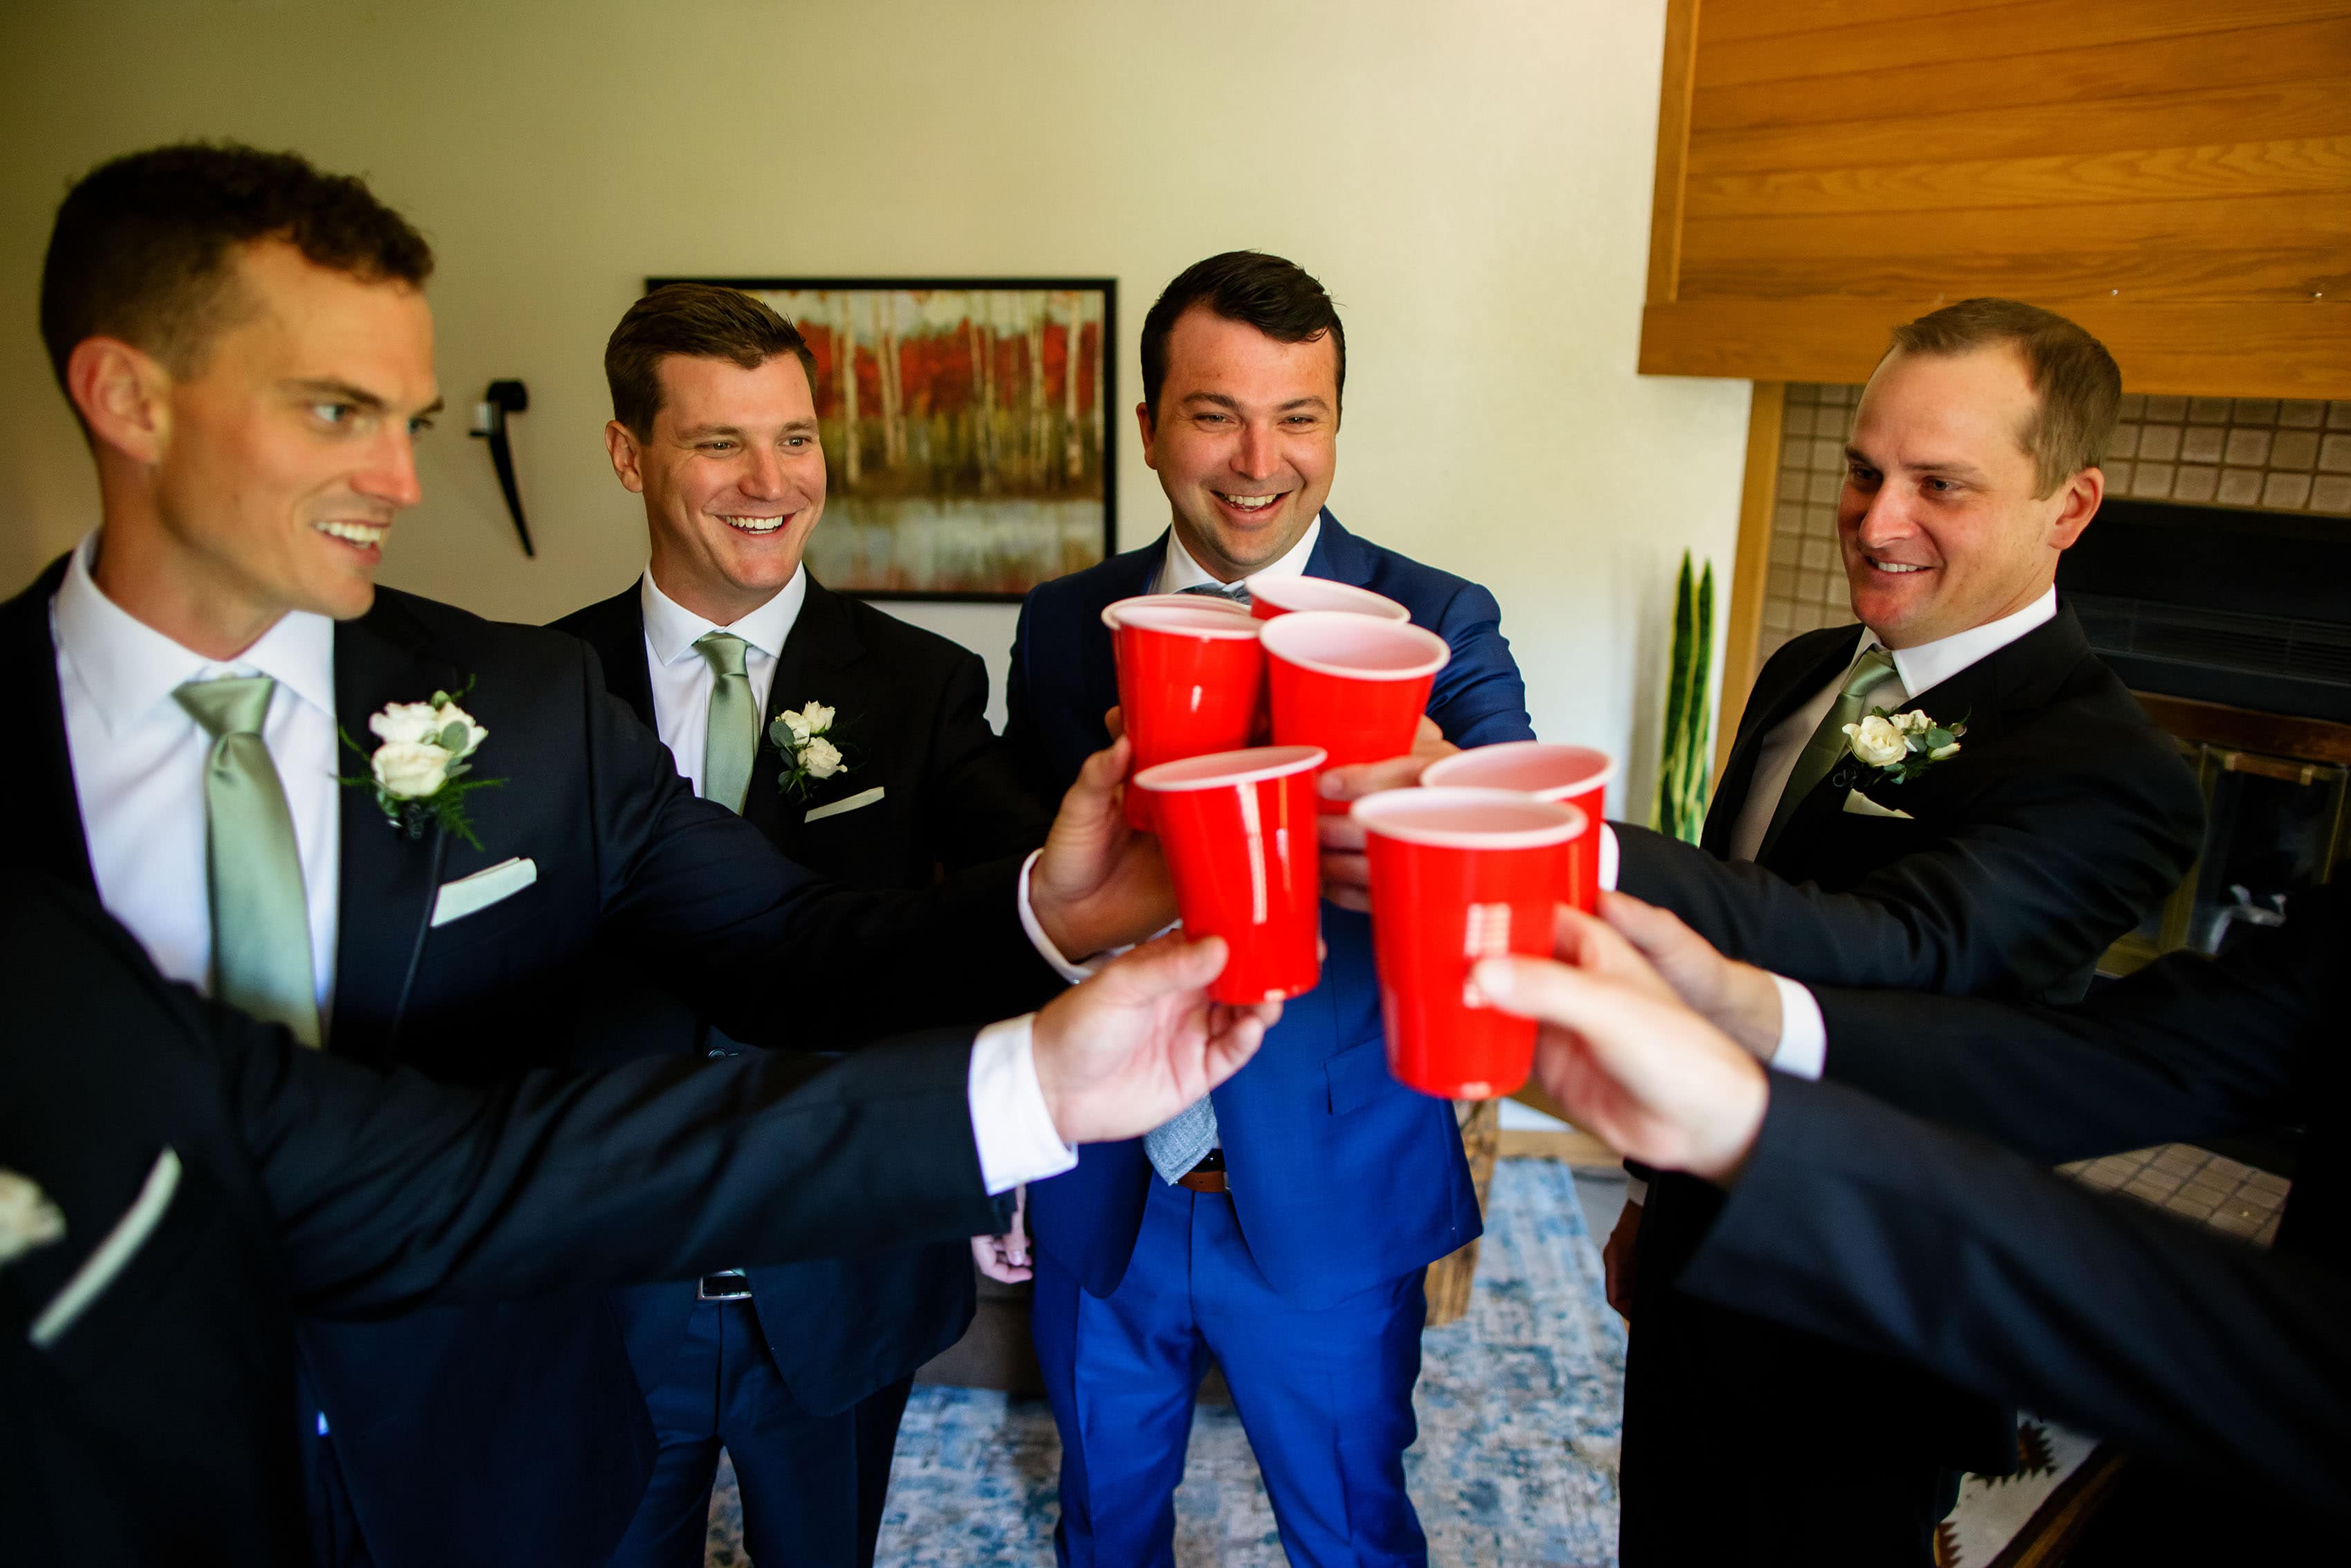 The groom toasts tequila with groomsmen